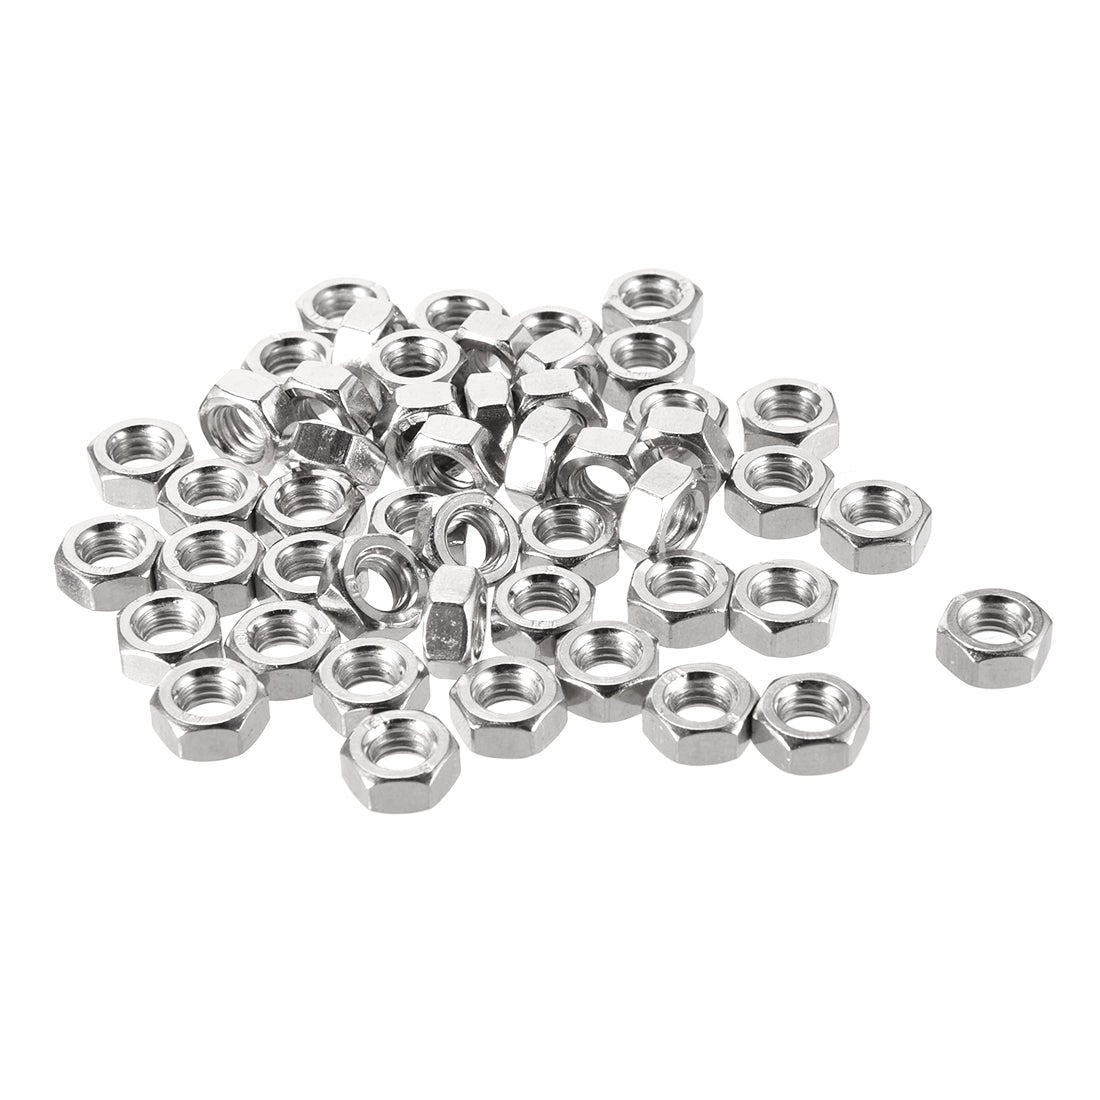 Uxcell Uxcell M6 Nickel Plating Metric Carbon Steel Hexagon Hex Nut Silver Tone 50pcs